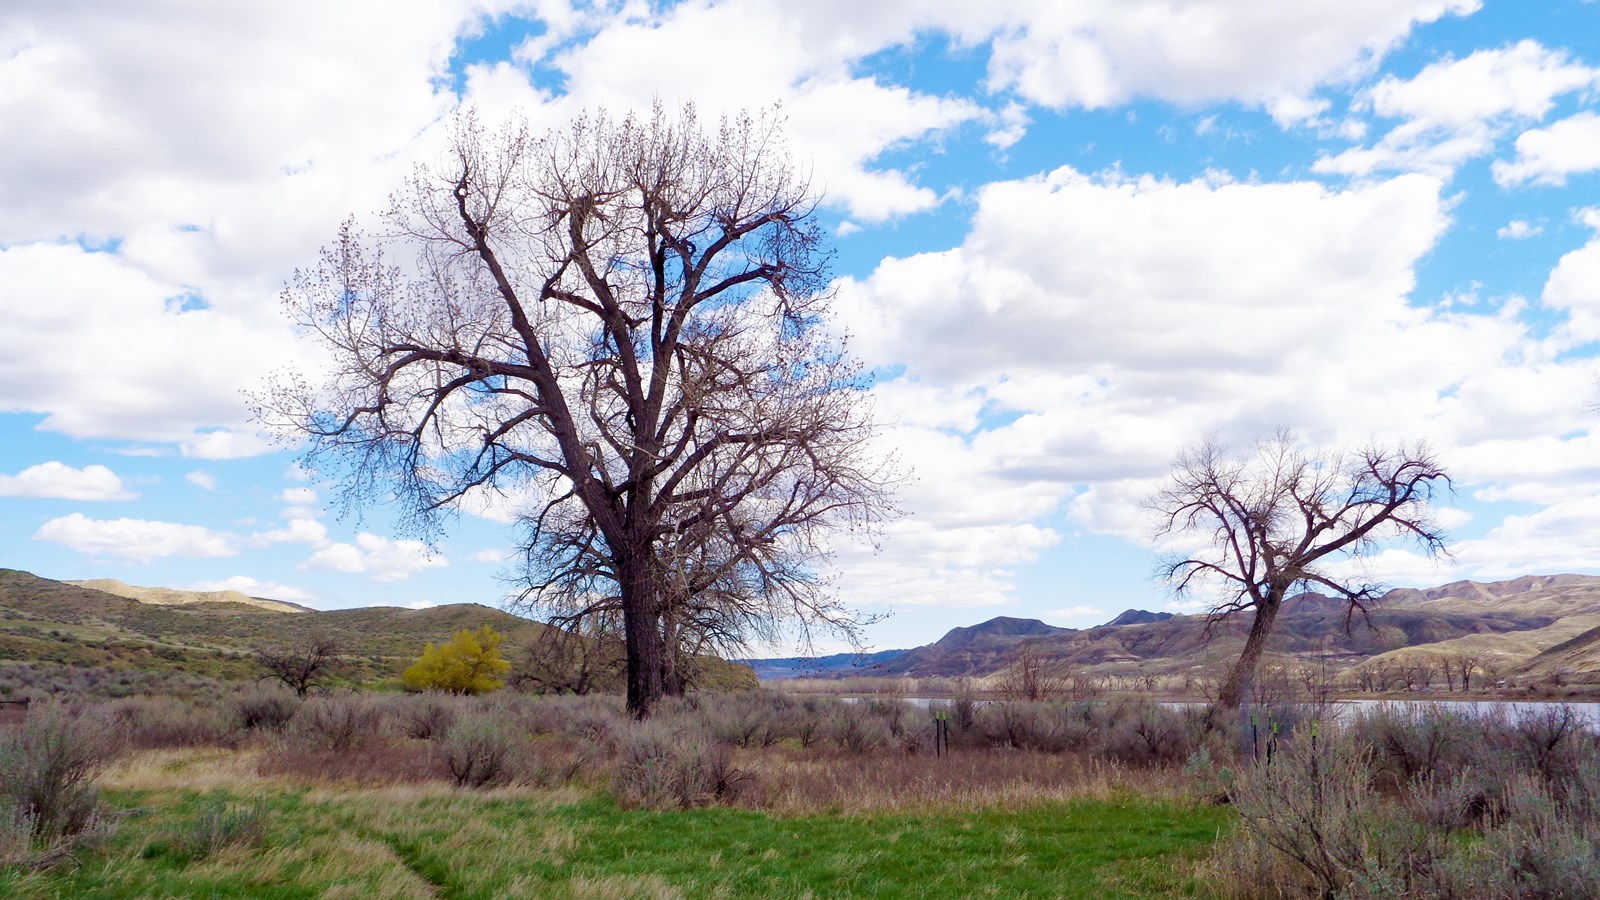 Grassy river bottoms with two large cottonwood trees with river in the background